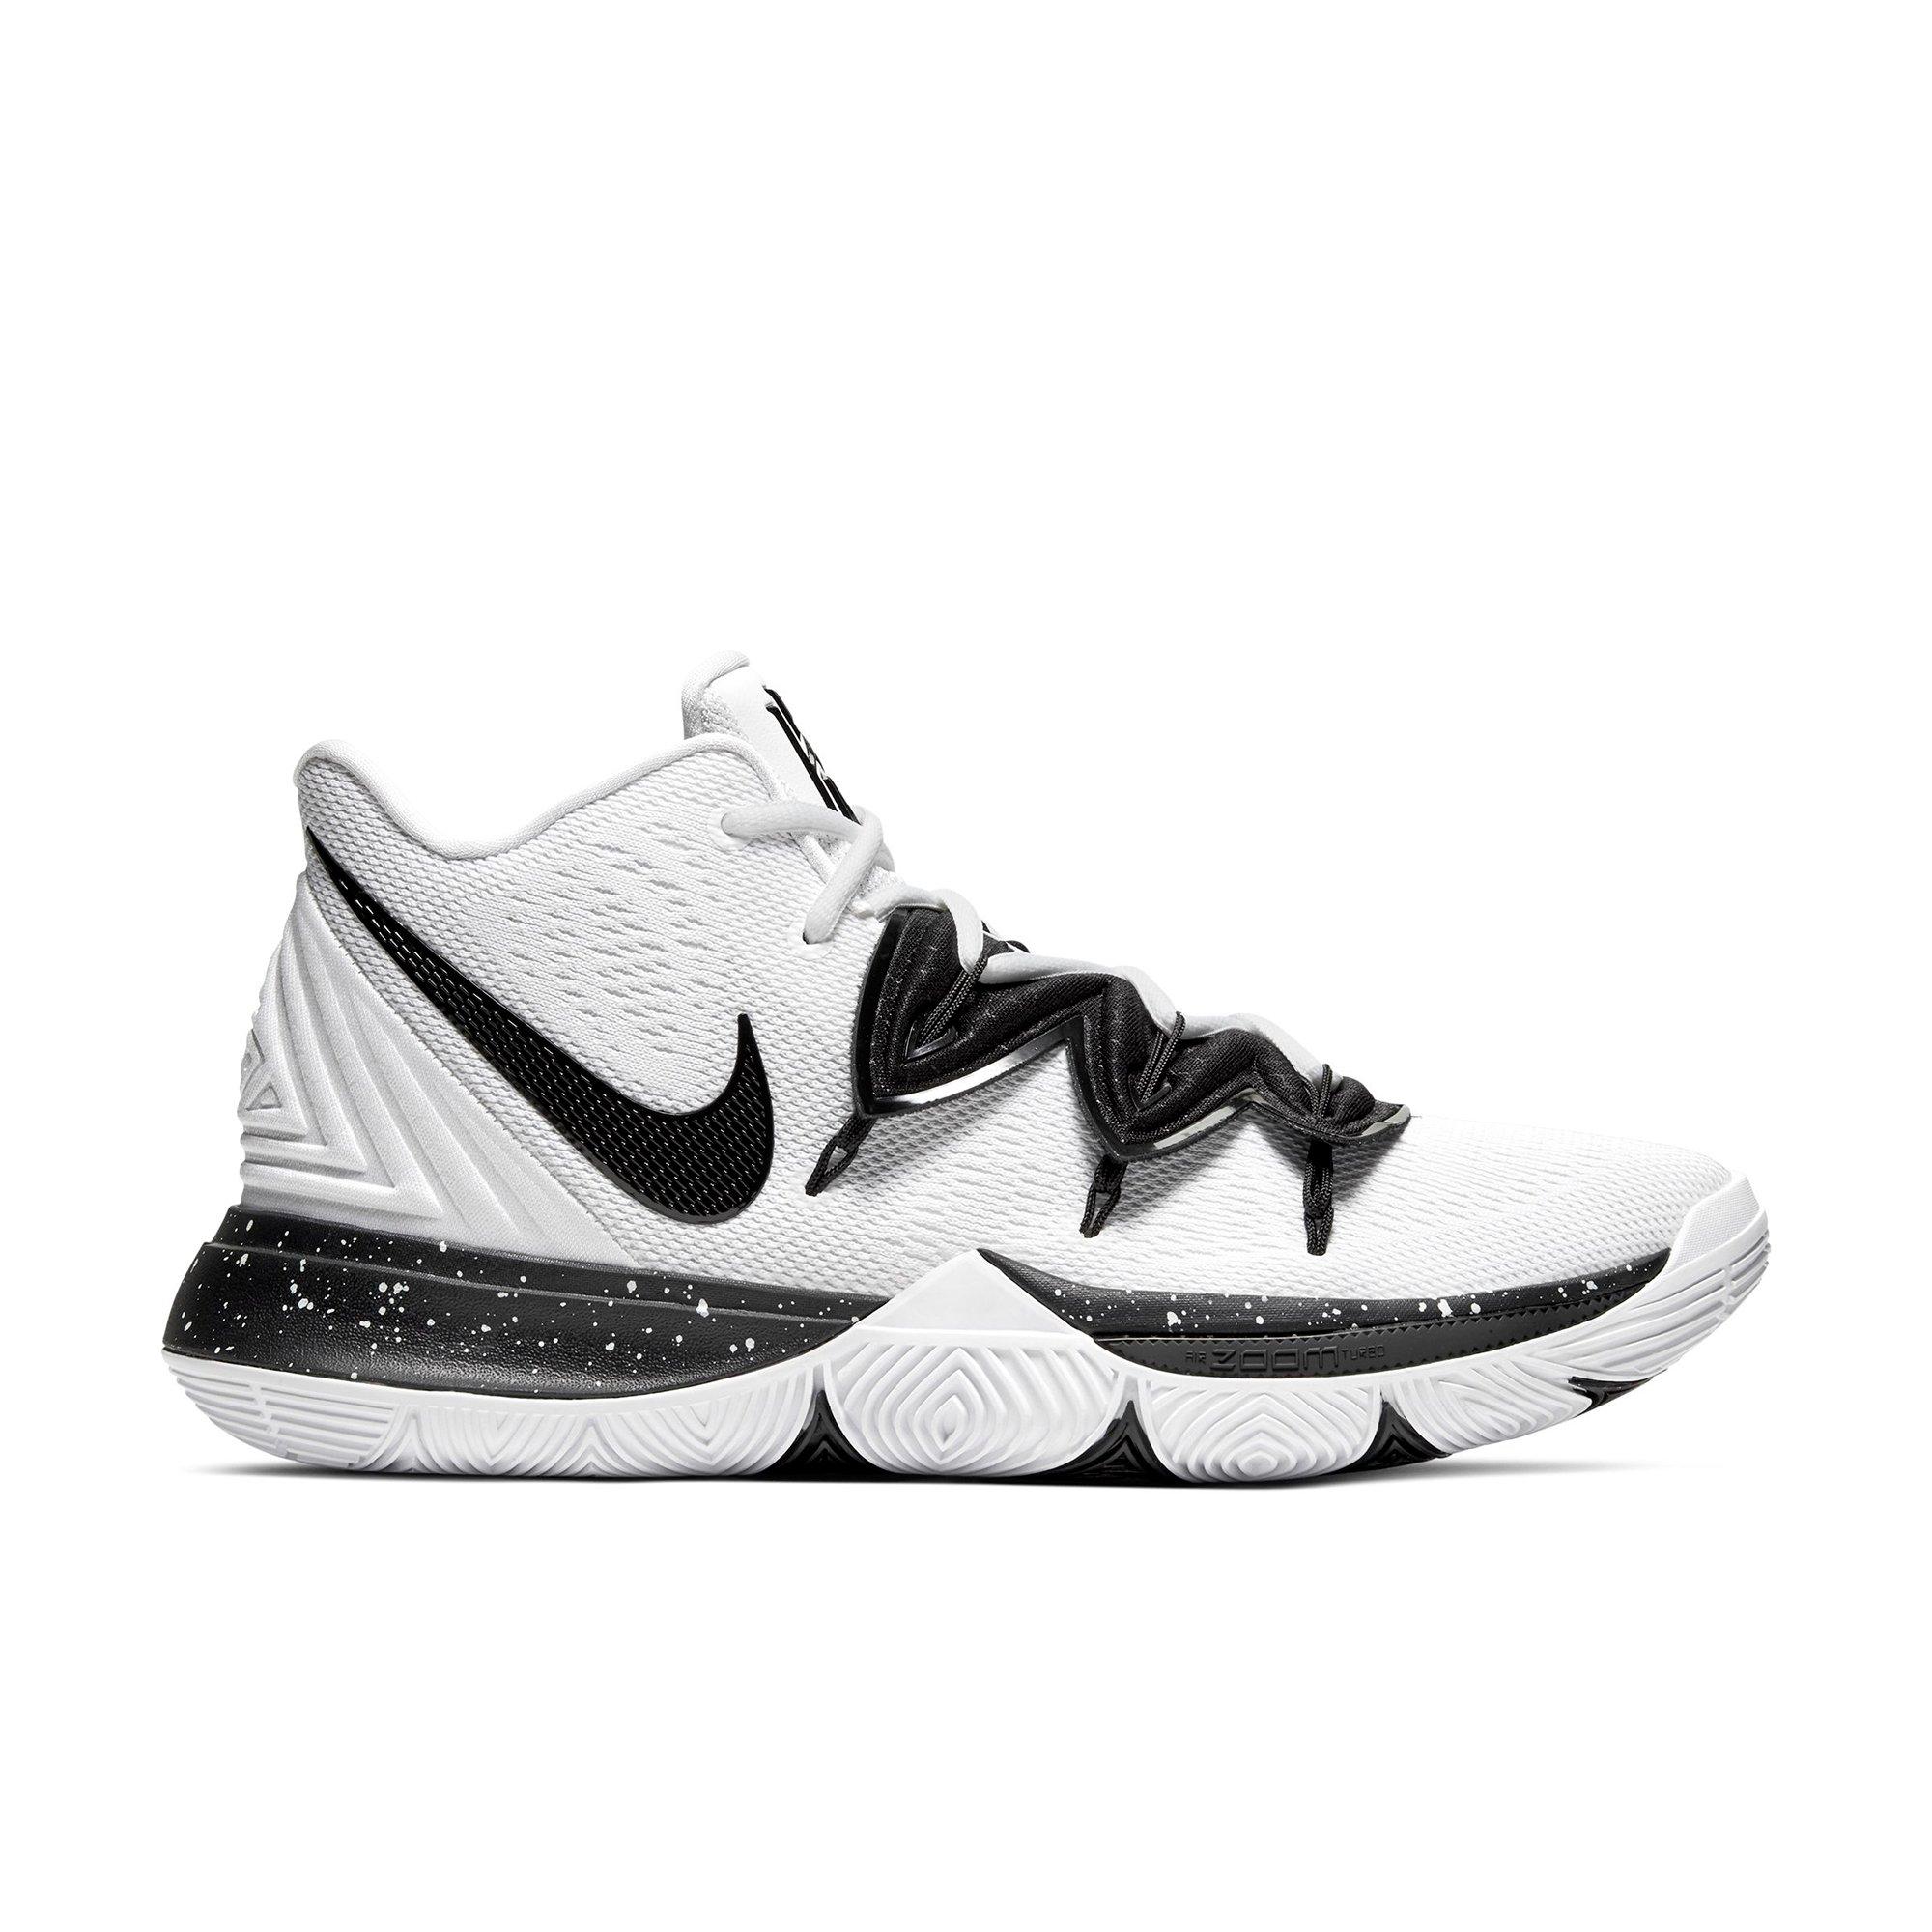 kyrie 5 size 8.5 mens